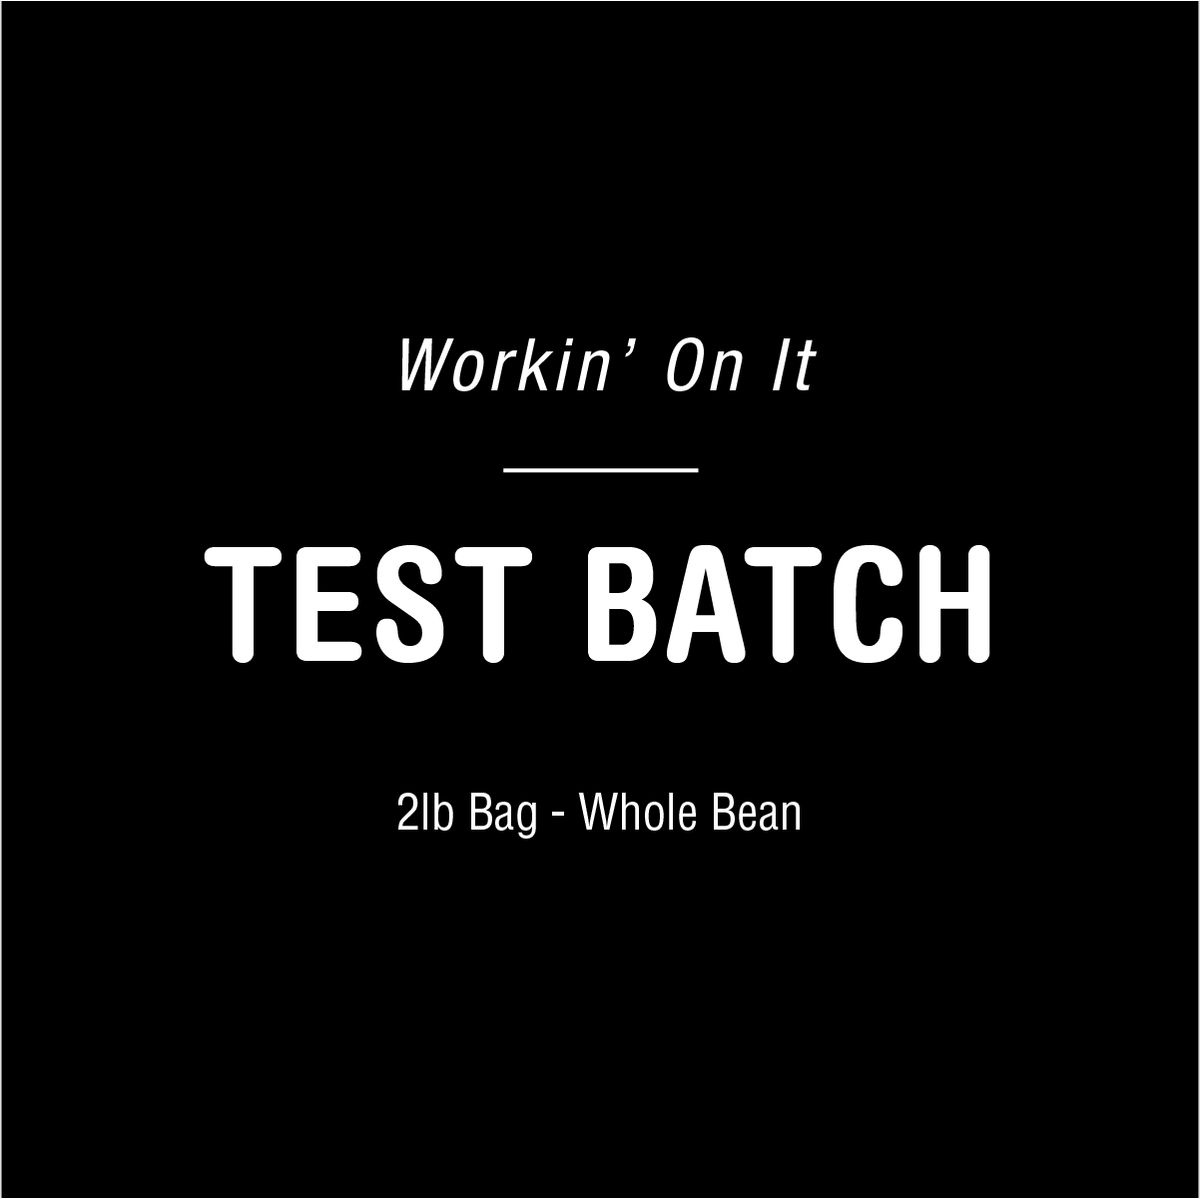 White text on a black background reads "workin' on it coffee Tandem Test Batch 2lb bag - whole bean." The text is styled with a header and additional detail below.